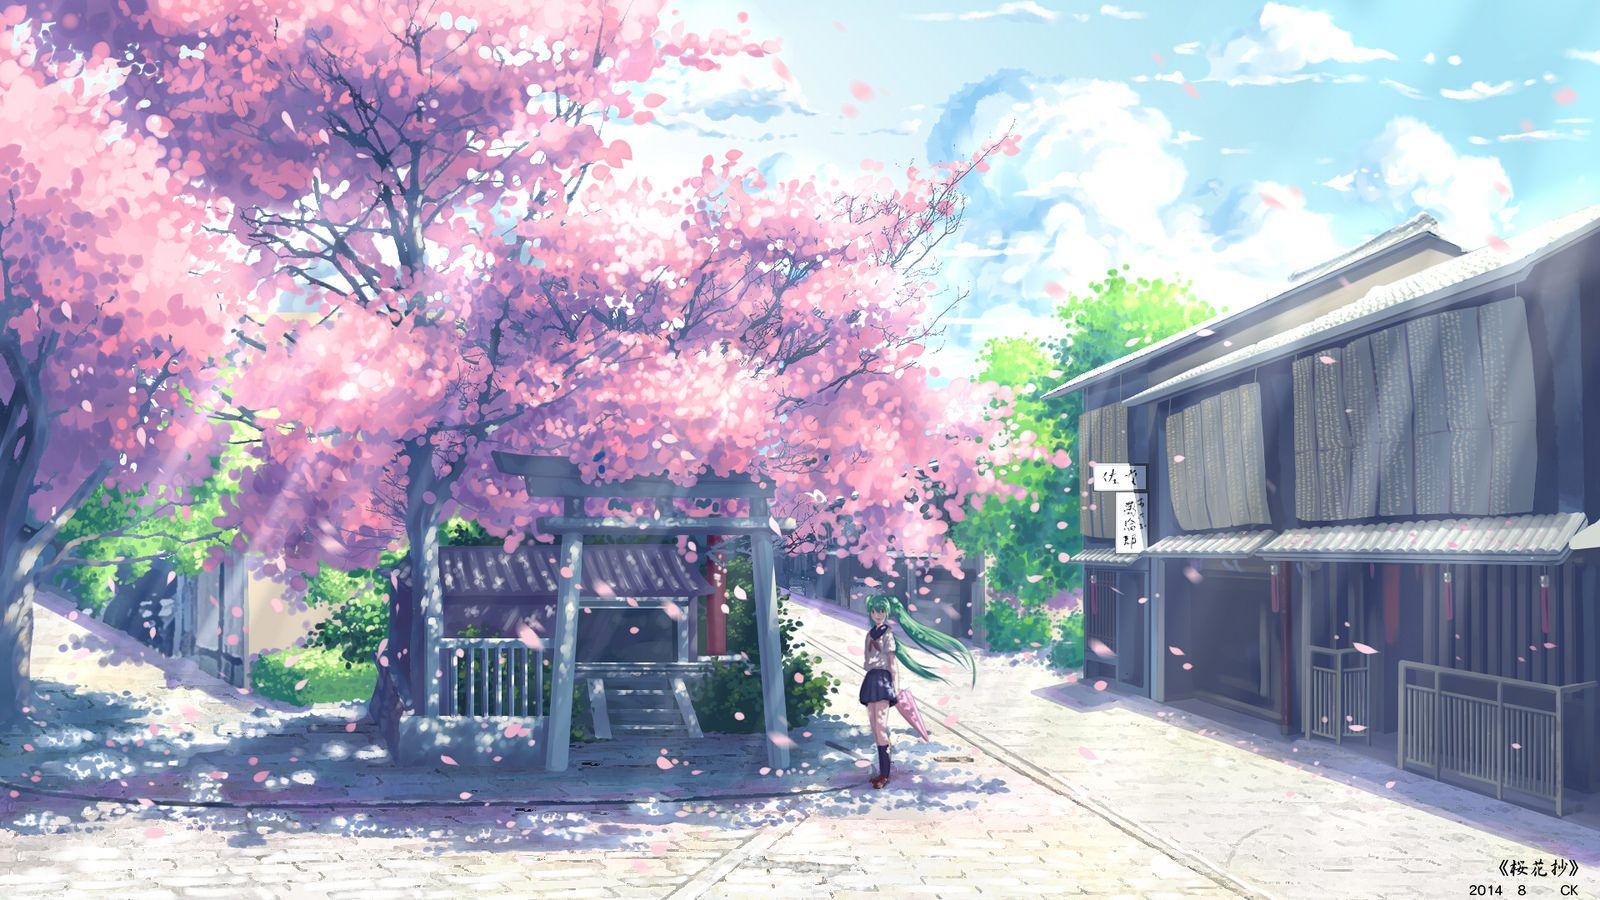 Anime Scenery Cherry Blossoms Background Hd Image 1_28214060692_o. Anime Wallpaper 1920x Anime Background Wallpaper, Anime Cherry Blossom